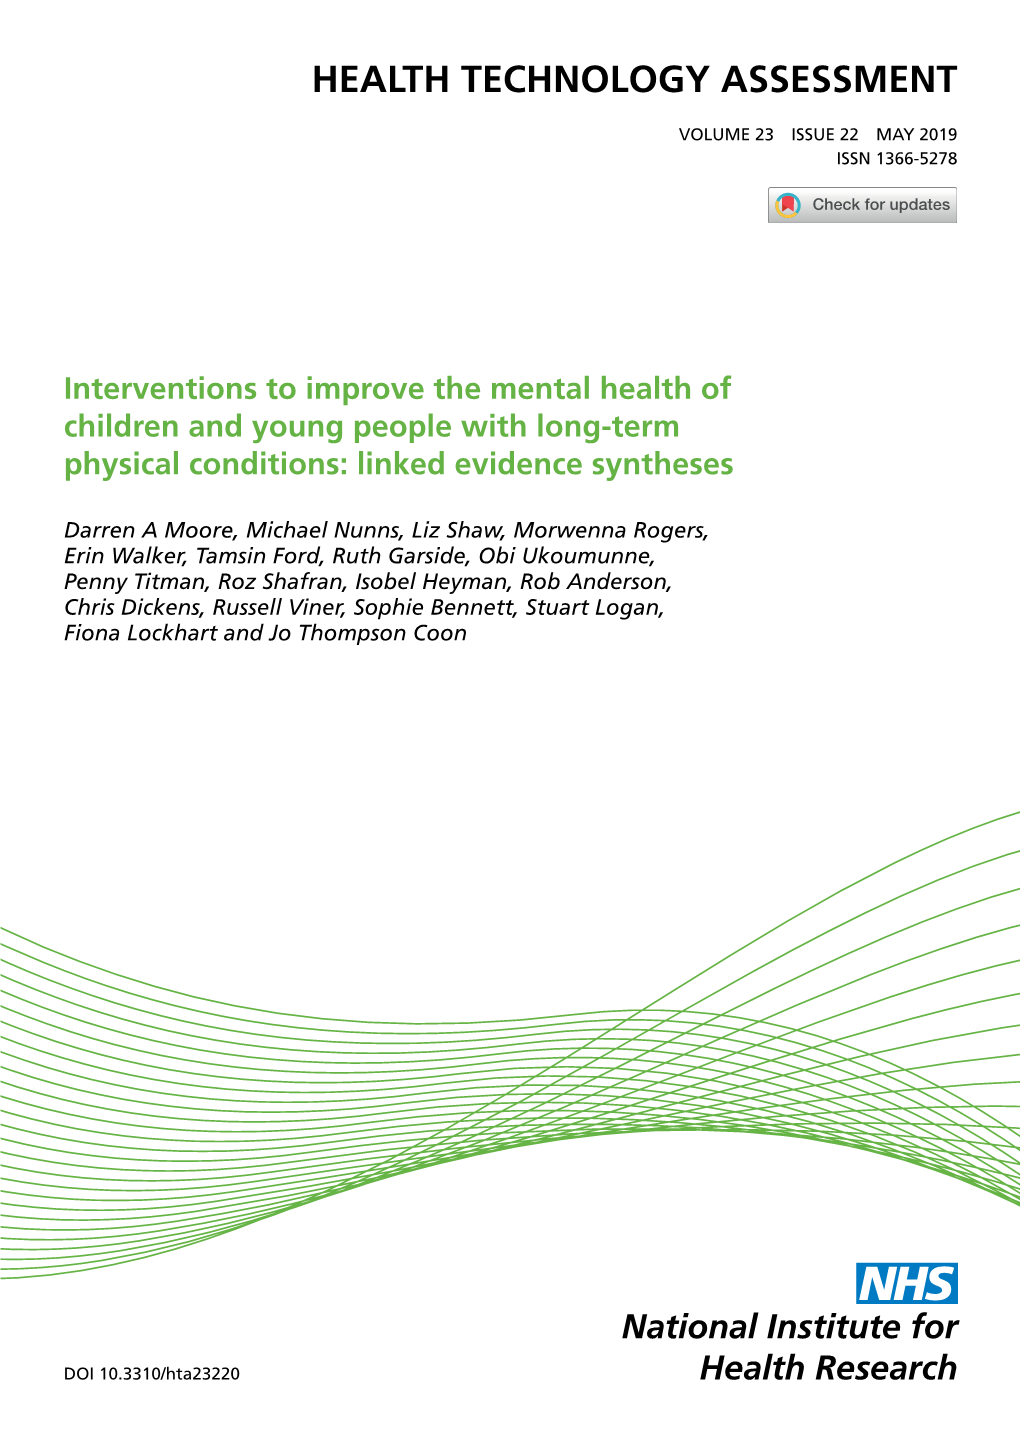 Interventions to Improve the Mental Health of Children and Young People with Long-Term Physical Conditions: Linked Evidence Syntheses